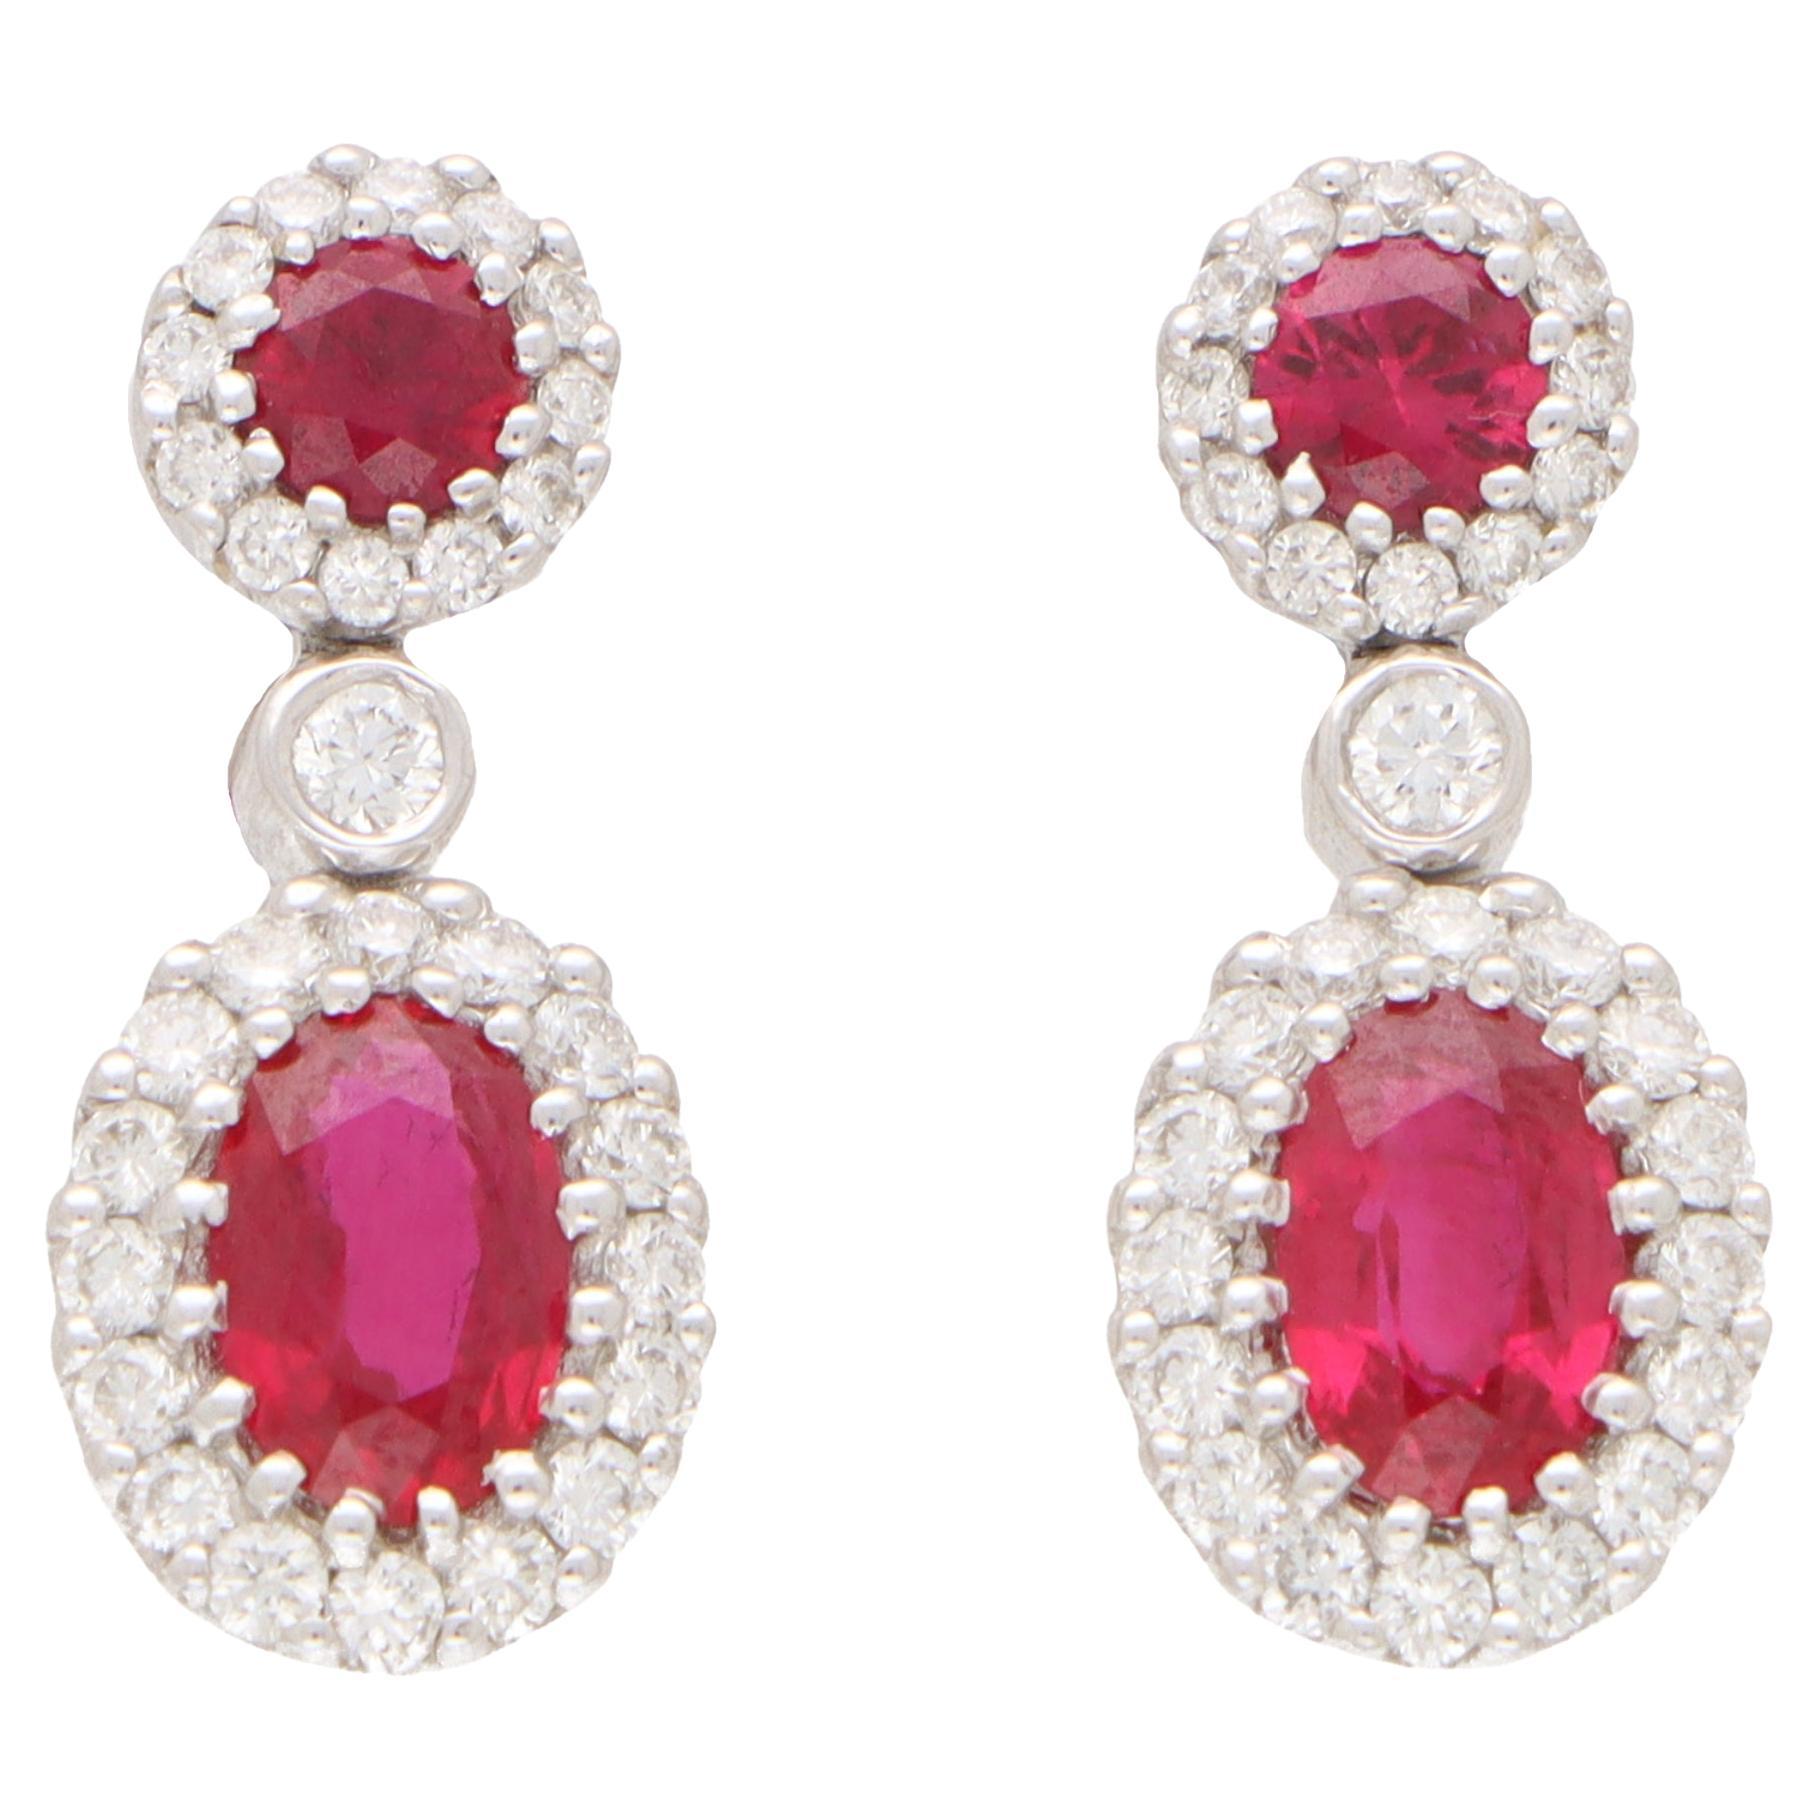 Vintage Ruby and Diamond Double Cluster Drop Earrings in 18k White Gold